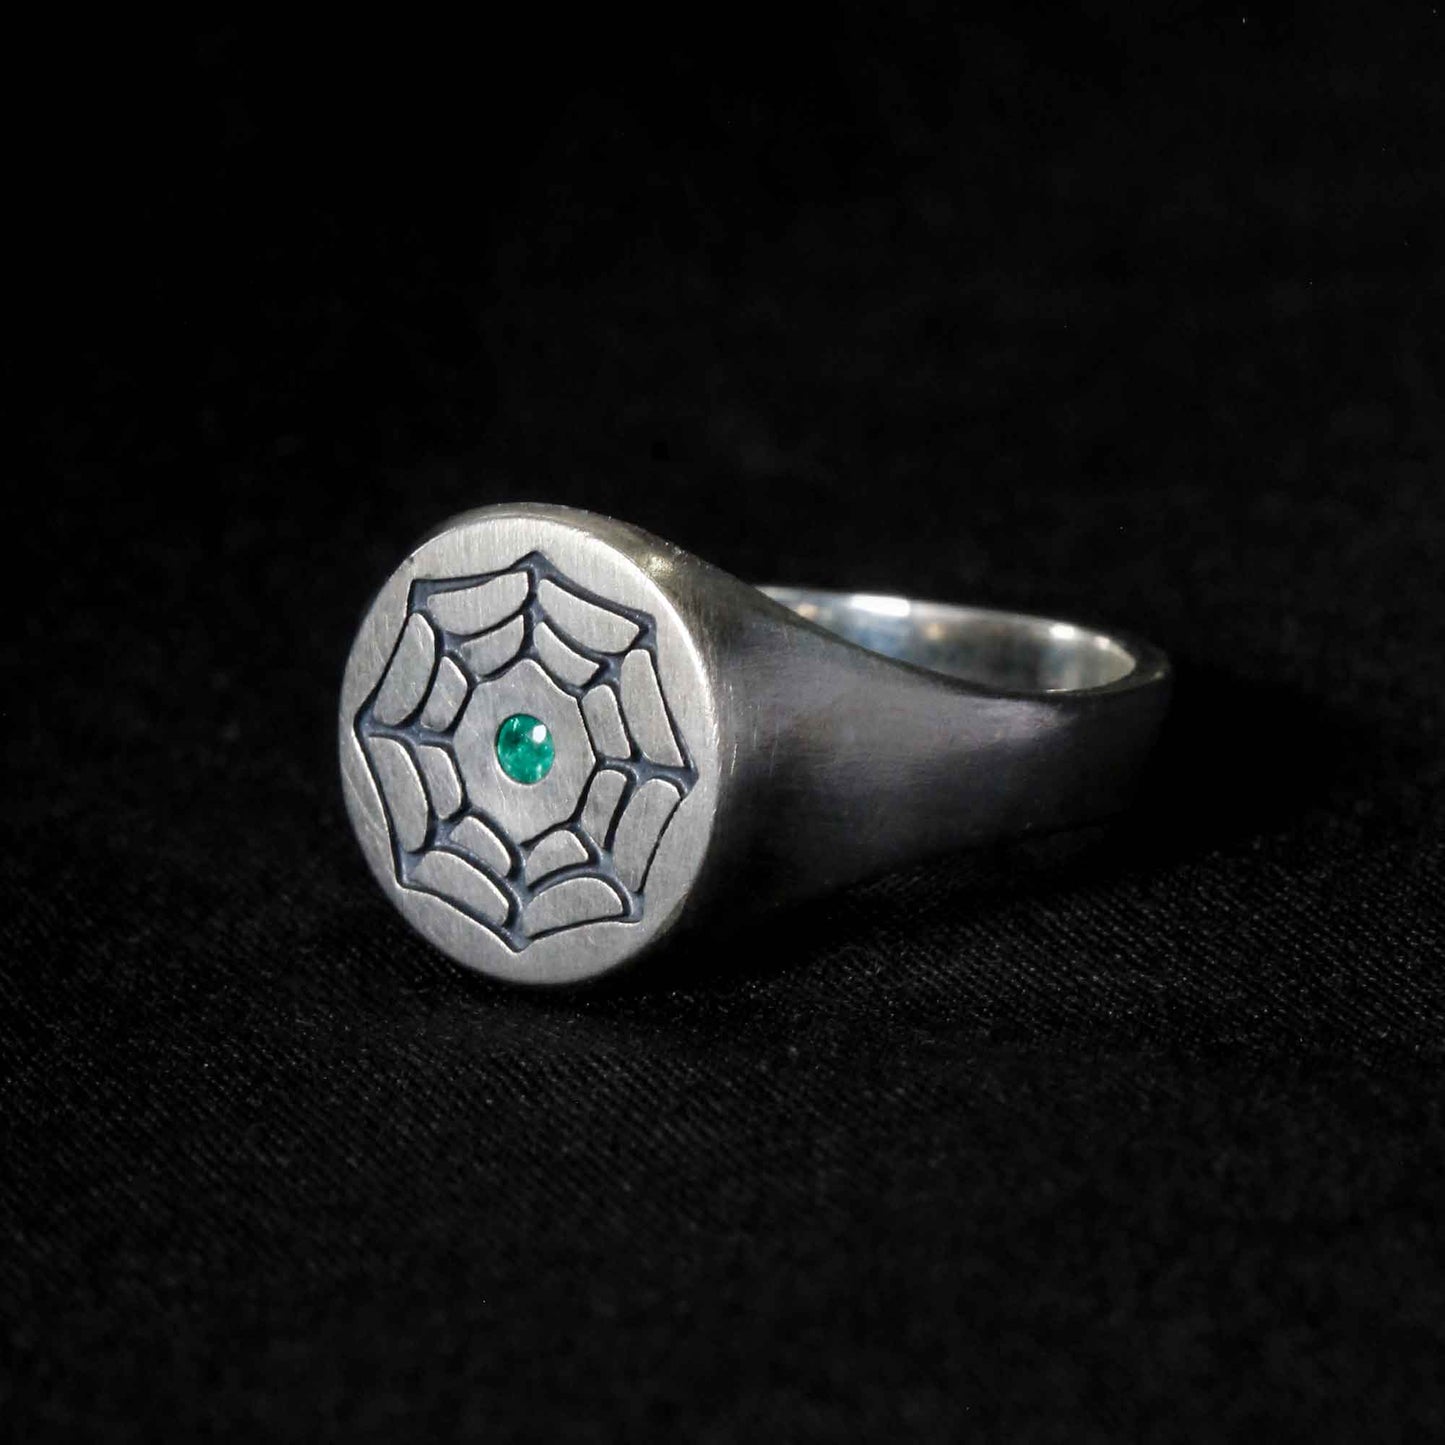 web engraving and a emerald stone on a 925 silver signet ringweb engraving and a emerald stone on a 925 silver signet ring